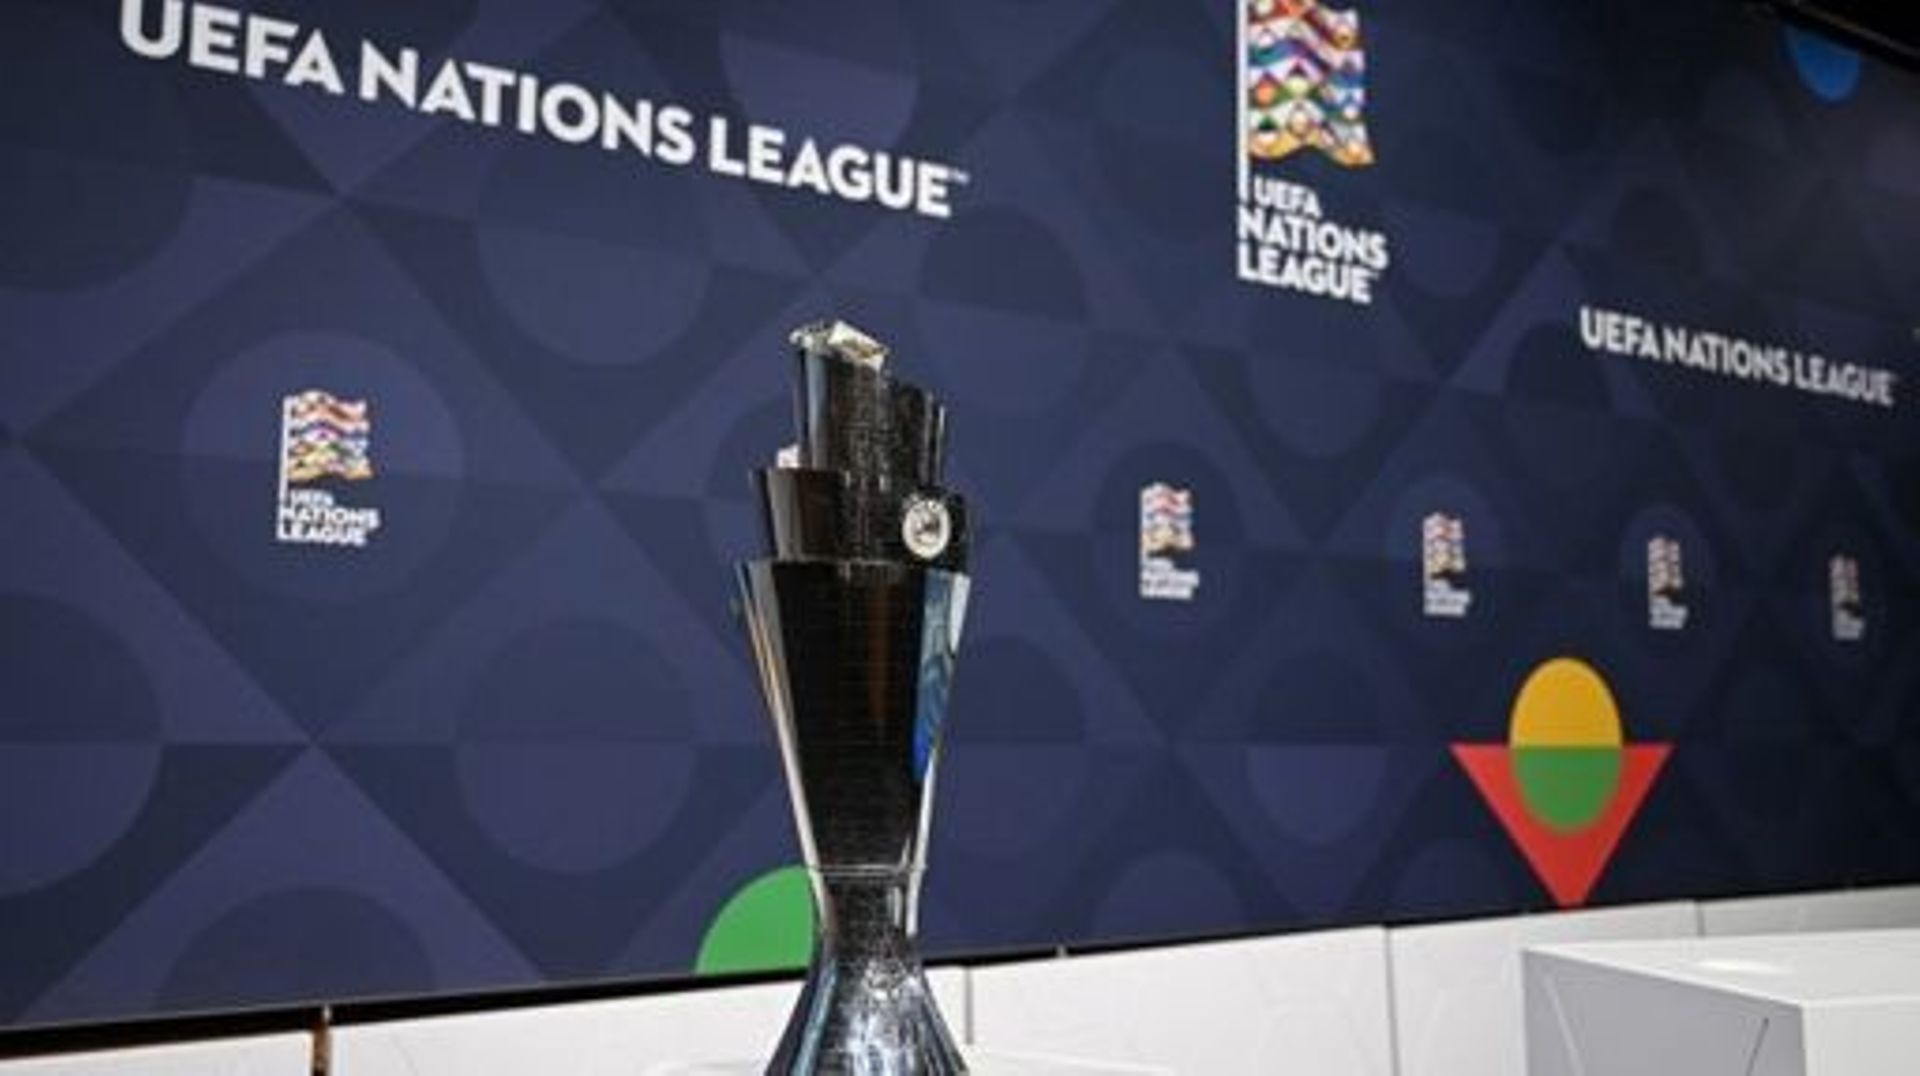 The UEFA Nations League trophy is displayed prior to the start of the 2023 UEFA Nations League football finals draw in Nyon, Switzerland, on January 25, 2023. The draw determines the semi-final pairings for the four-team 2023 UEFA Nations League football 